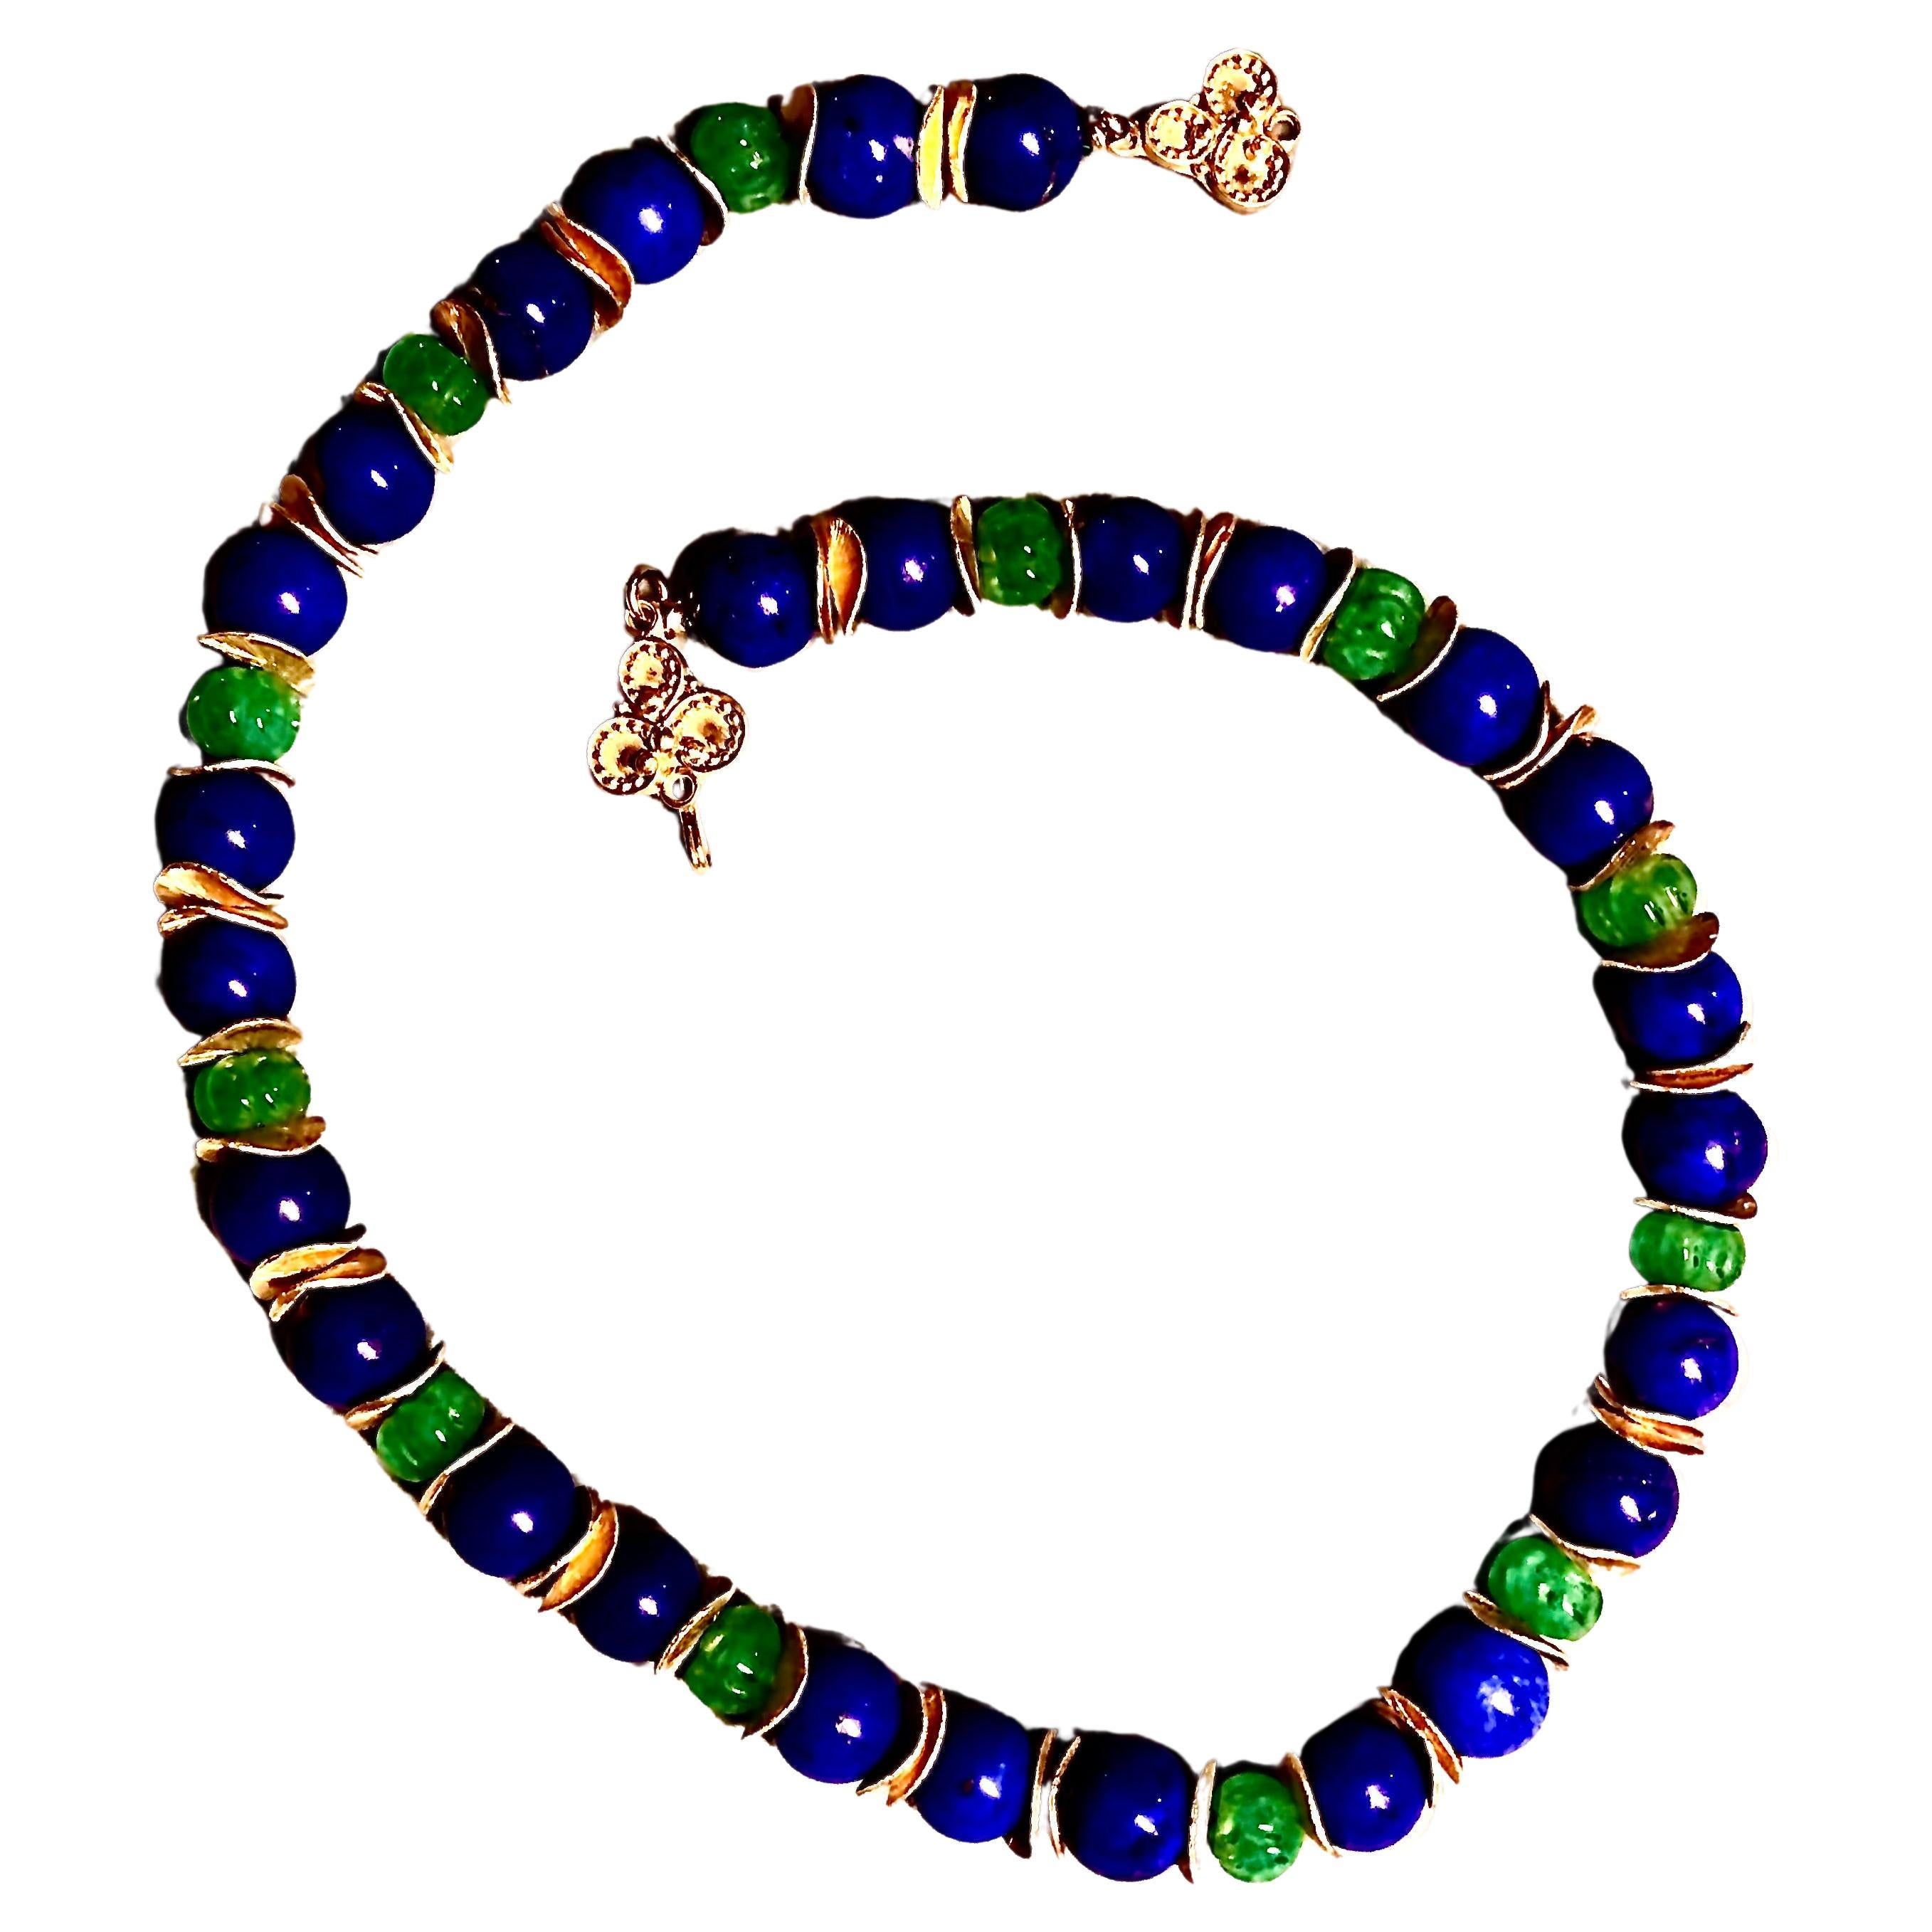 ﻿Chic and striking rich blue lapis and emerald melon deeply carved beads. The stones have beautiful and intense even coloration.

The beads are separated by wavy textured discs which give the illusion of movement to the whole piece.

The design